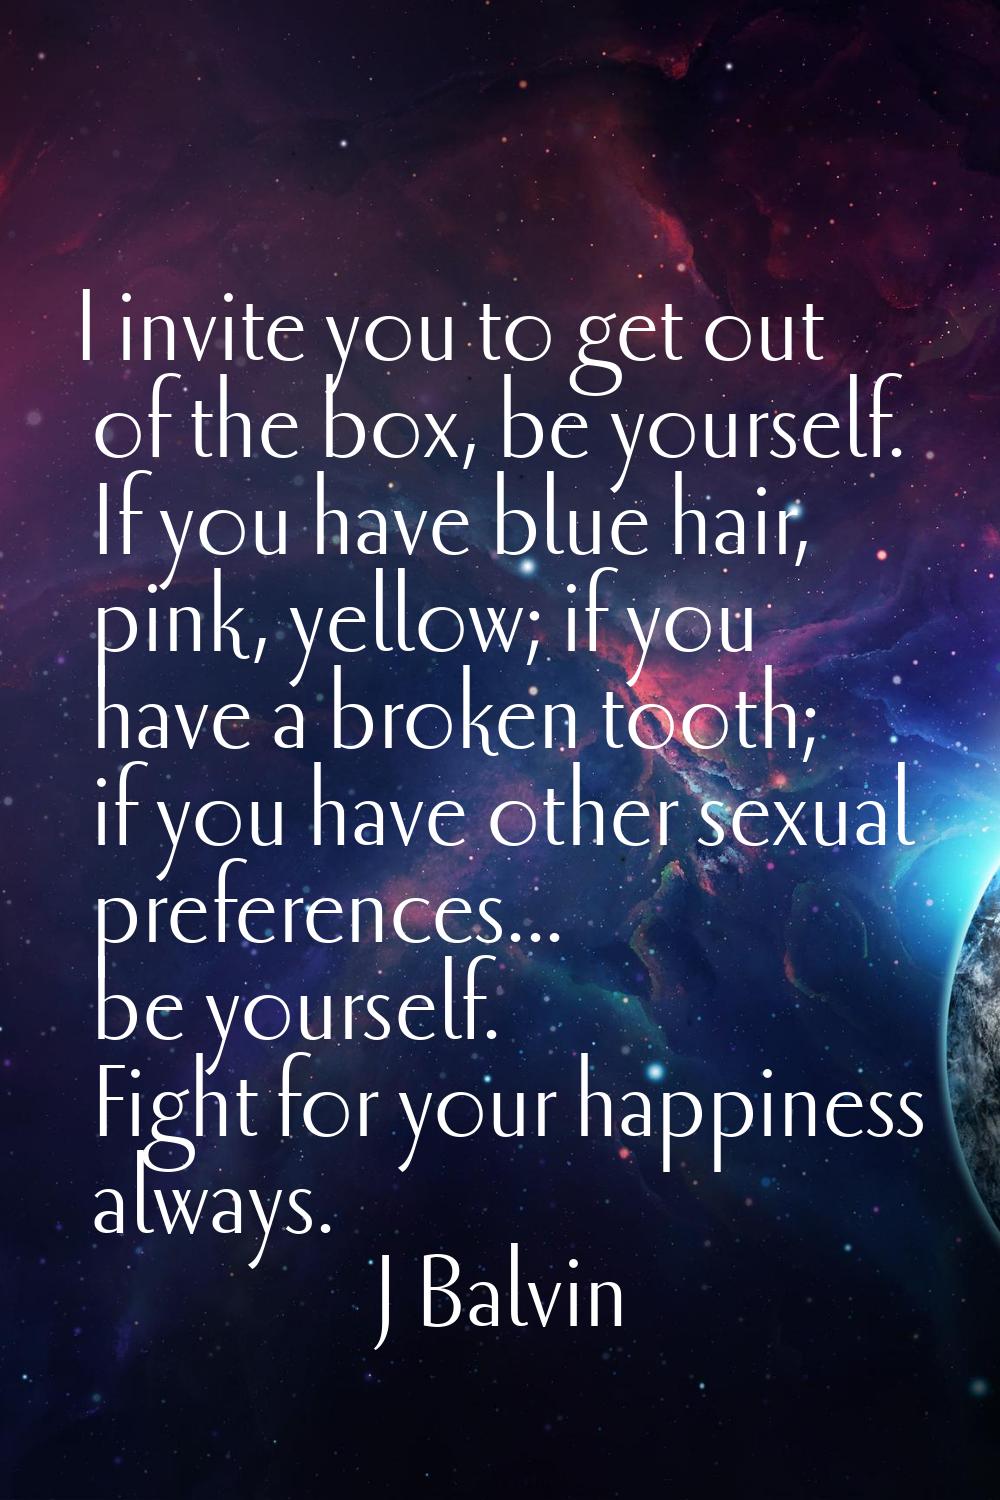 I invite you to get out of the box, be yourself. If you have blue hair, pink, yellow; if you have a